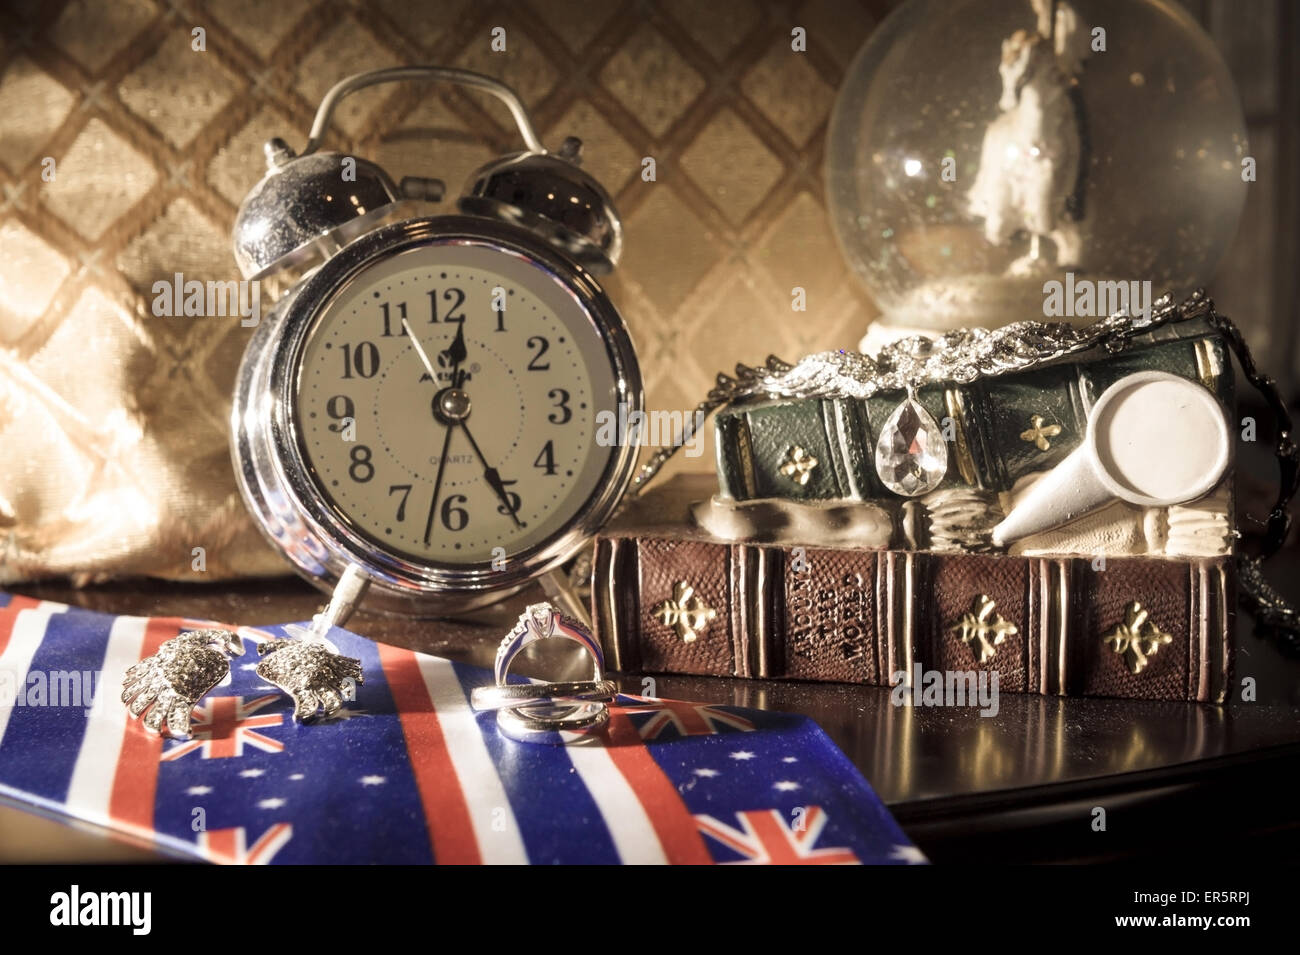 Vintage pocket watch and hour glass or sand timer, symbols of time with copy space Stock Photo